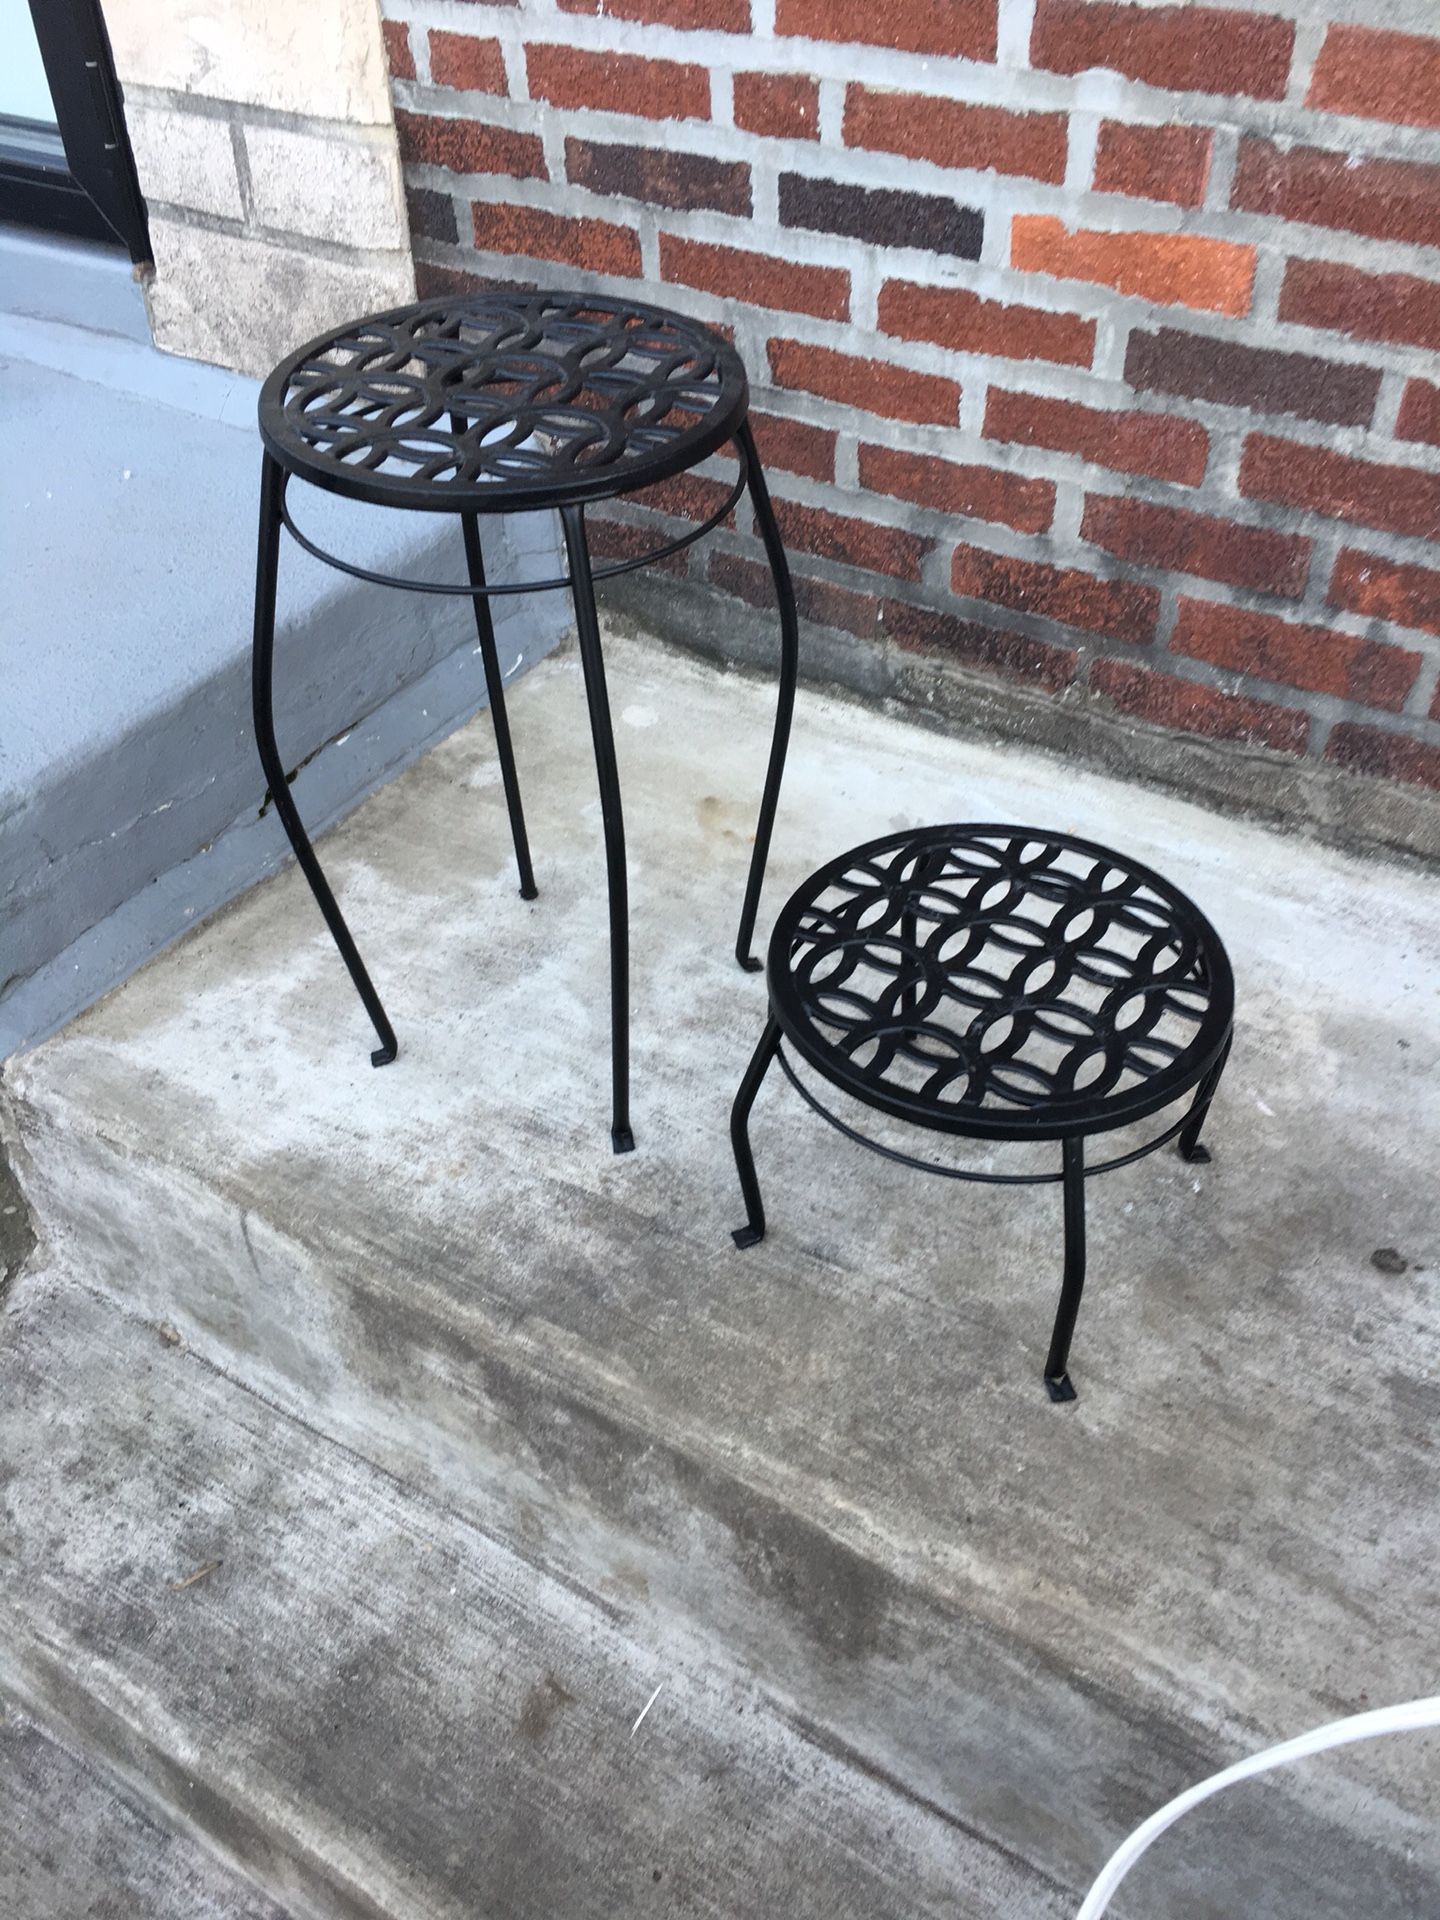 Matching plant stands